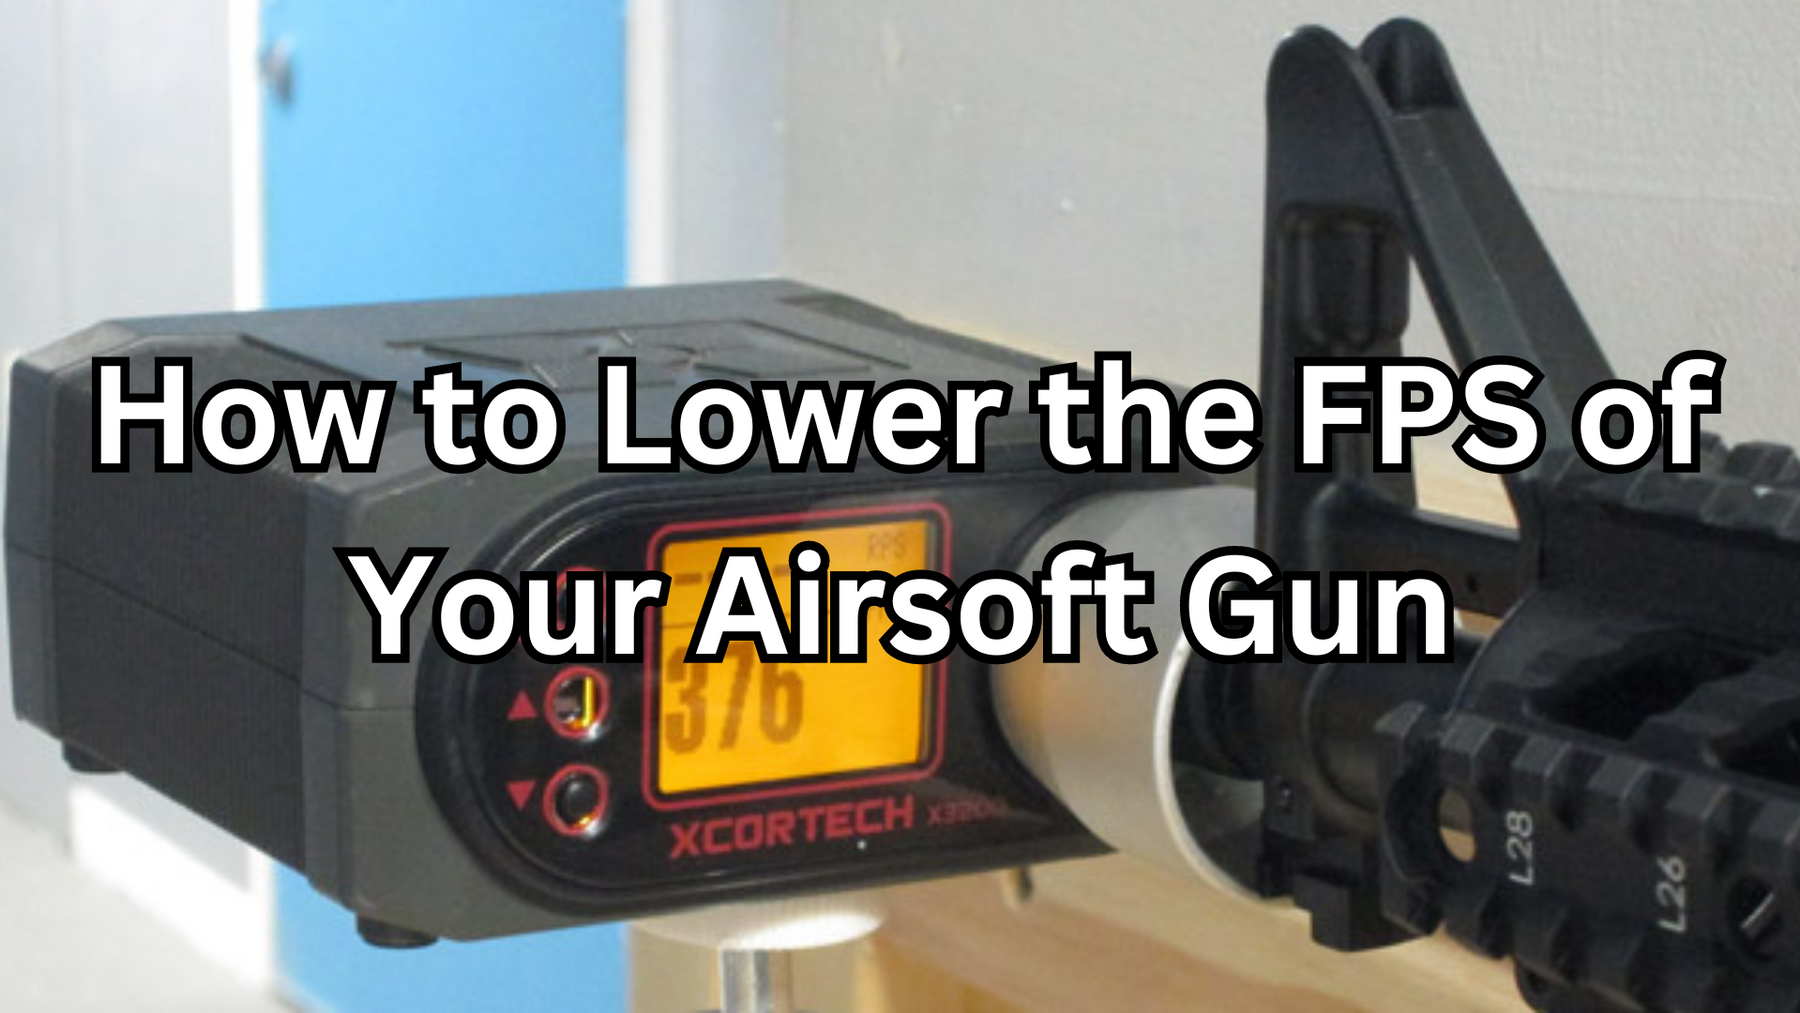 How to Lower the FPS of Your Airsoft Gun